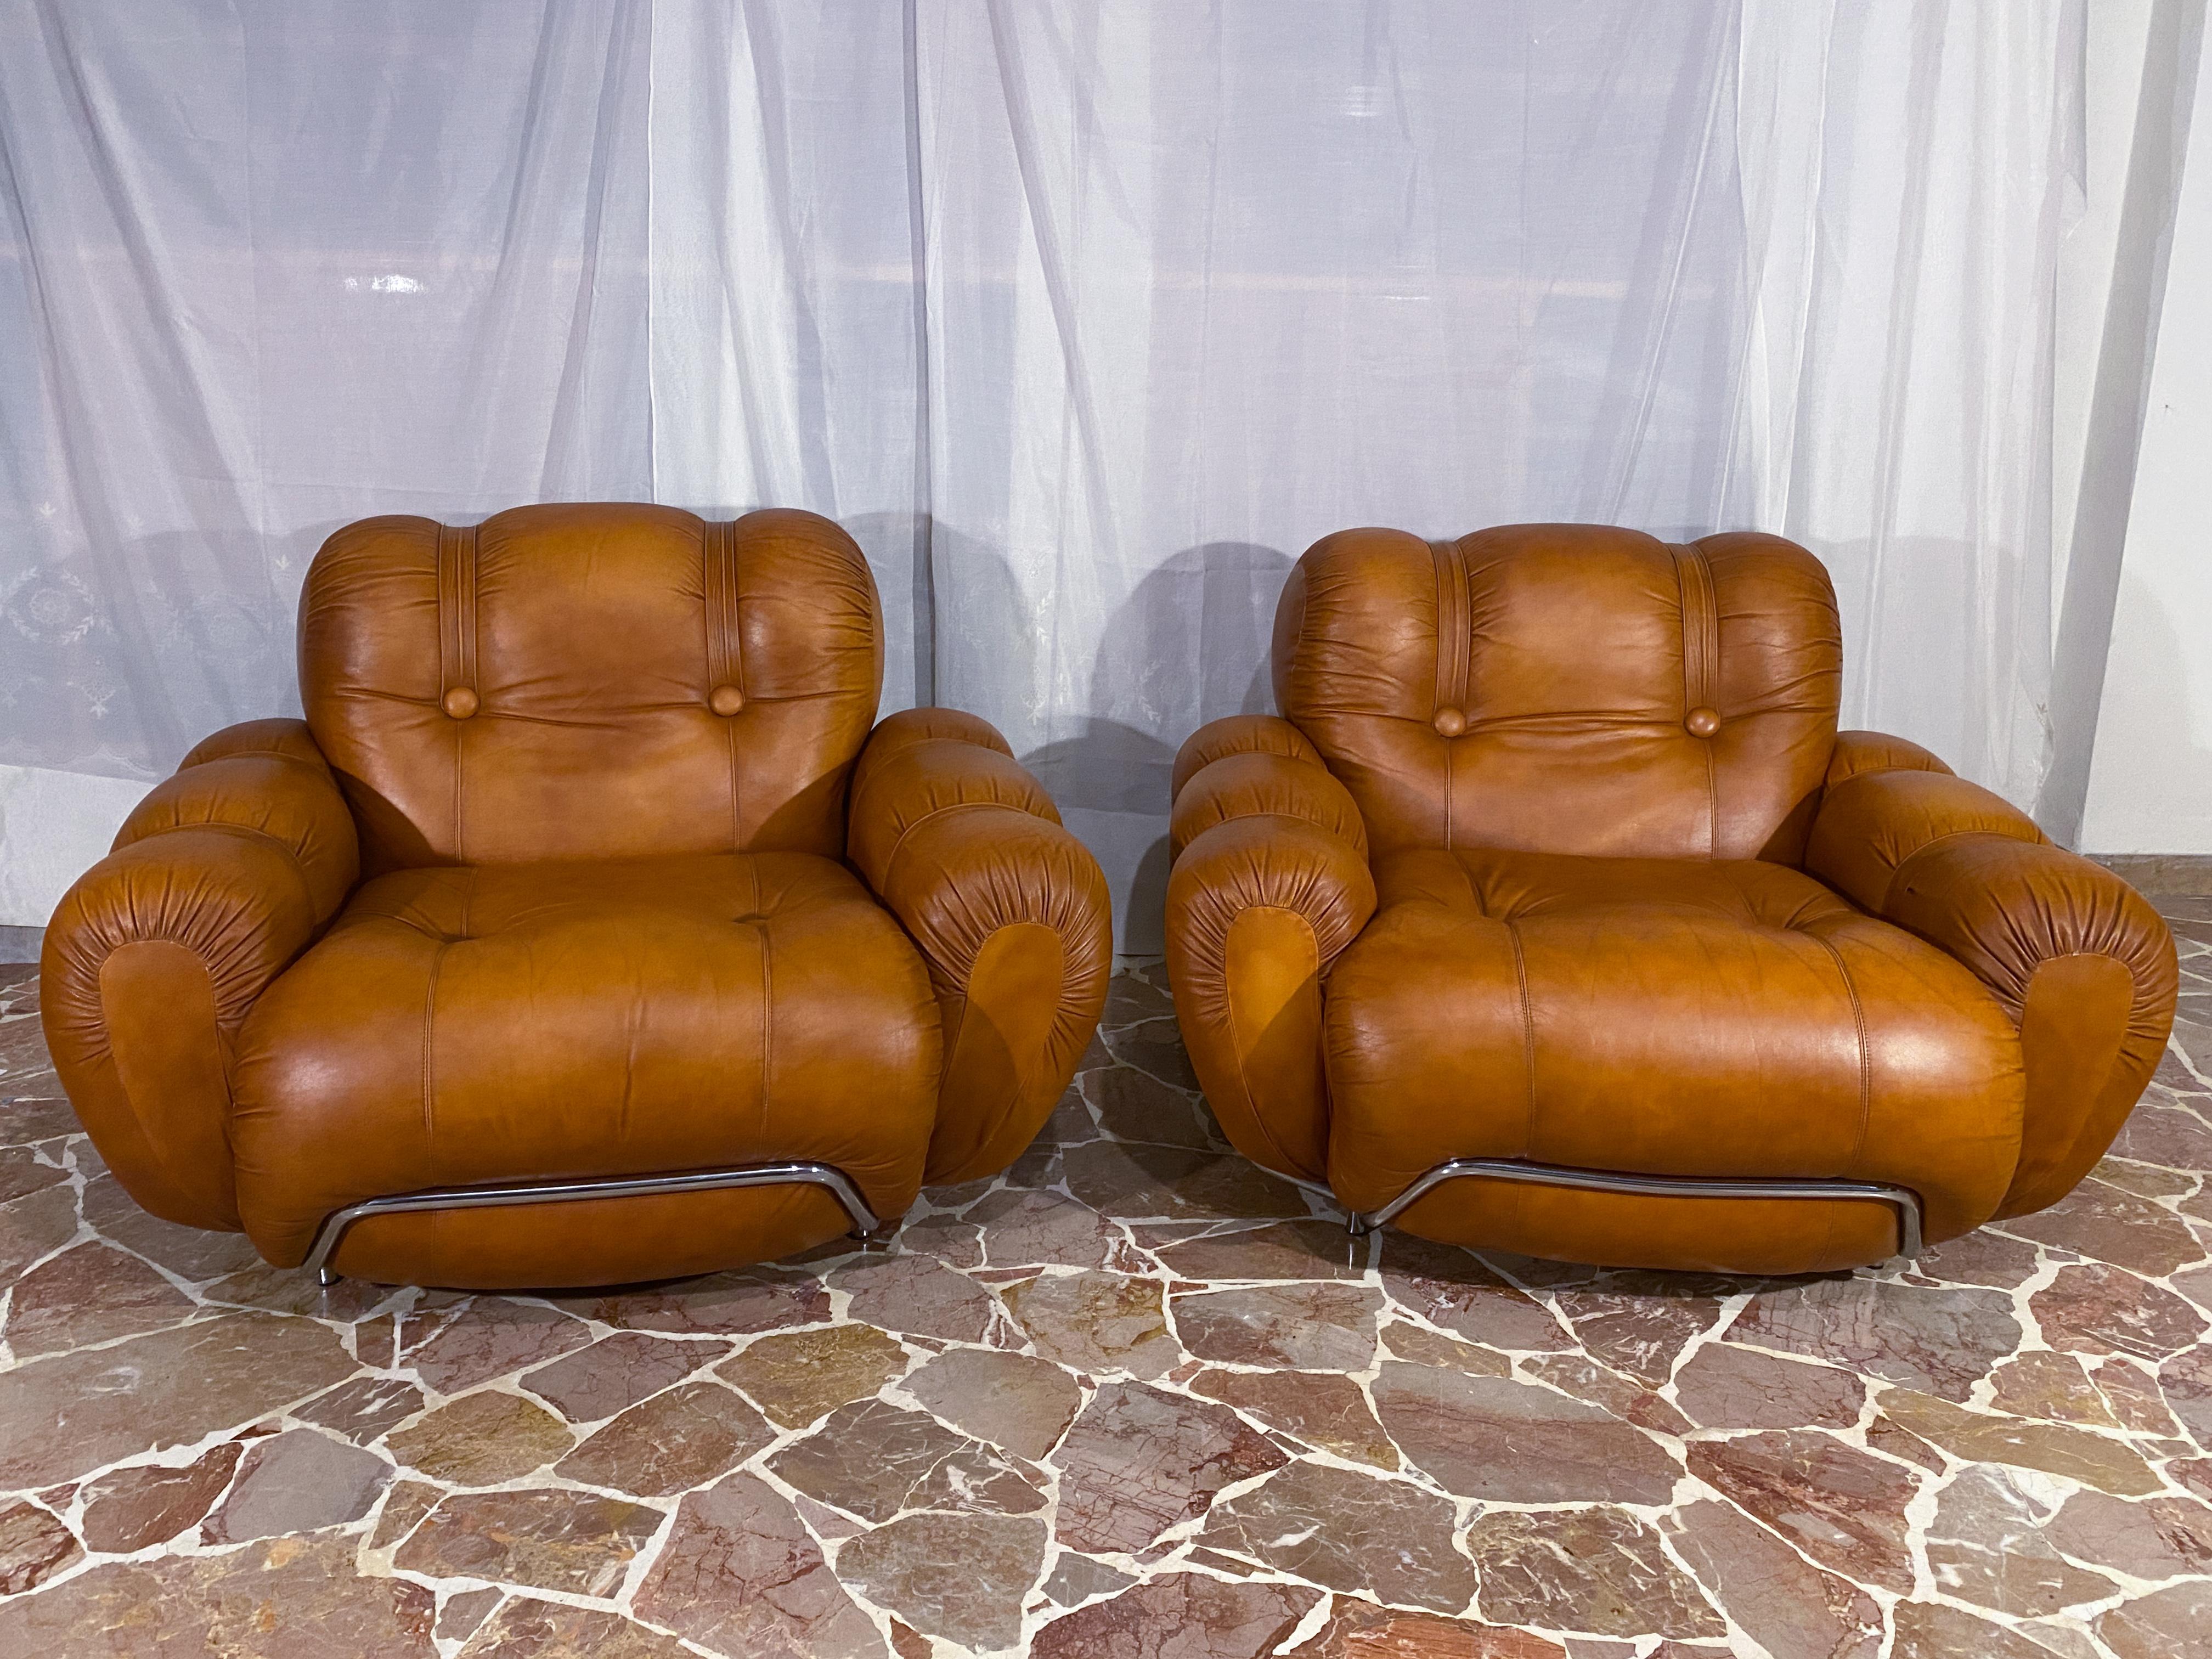 Splendid living room set composed of the three-seater sofa and a pair of armchairs made in Italy in the 70s. The seats are very comfortable and supportive. The pads are still original and in very good condition. Original natural leather upholstery